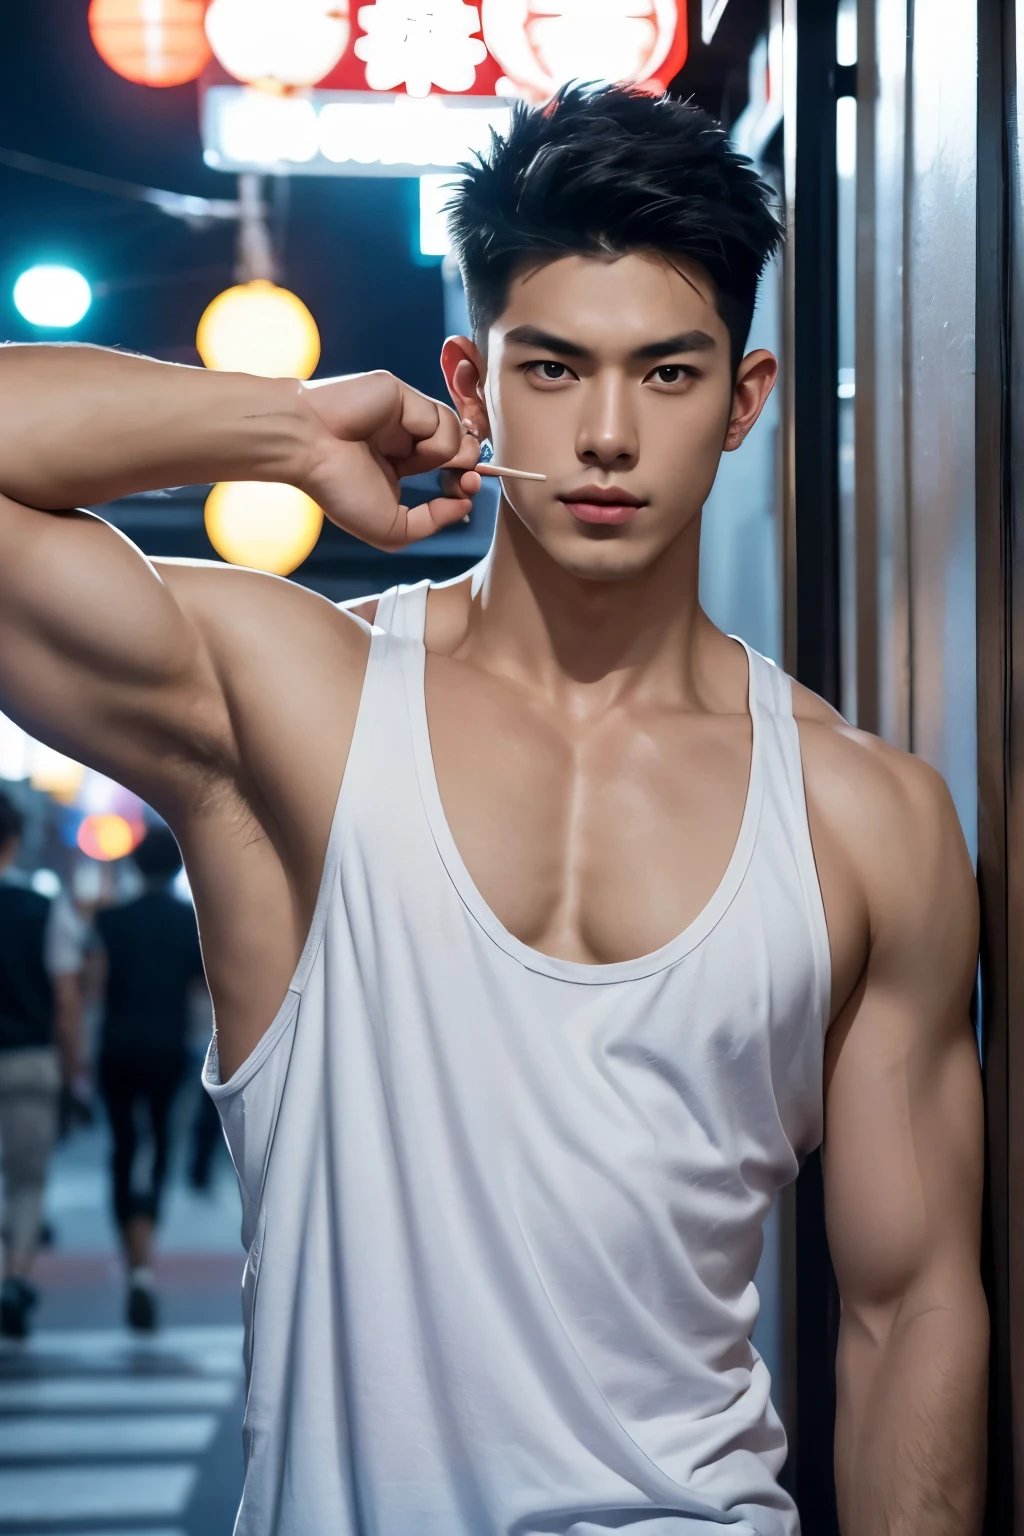 Japanese male male model, big muscles, handsome, cool, smoothly combed hair, pierced ears, wearing a loose tank top, holding a lollipop, portraiture, modeling, dynamic pose, Japanese street, late at night, store lights trade, full half body shot 